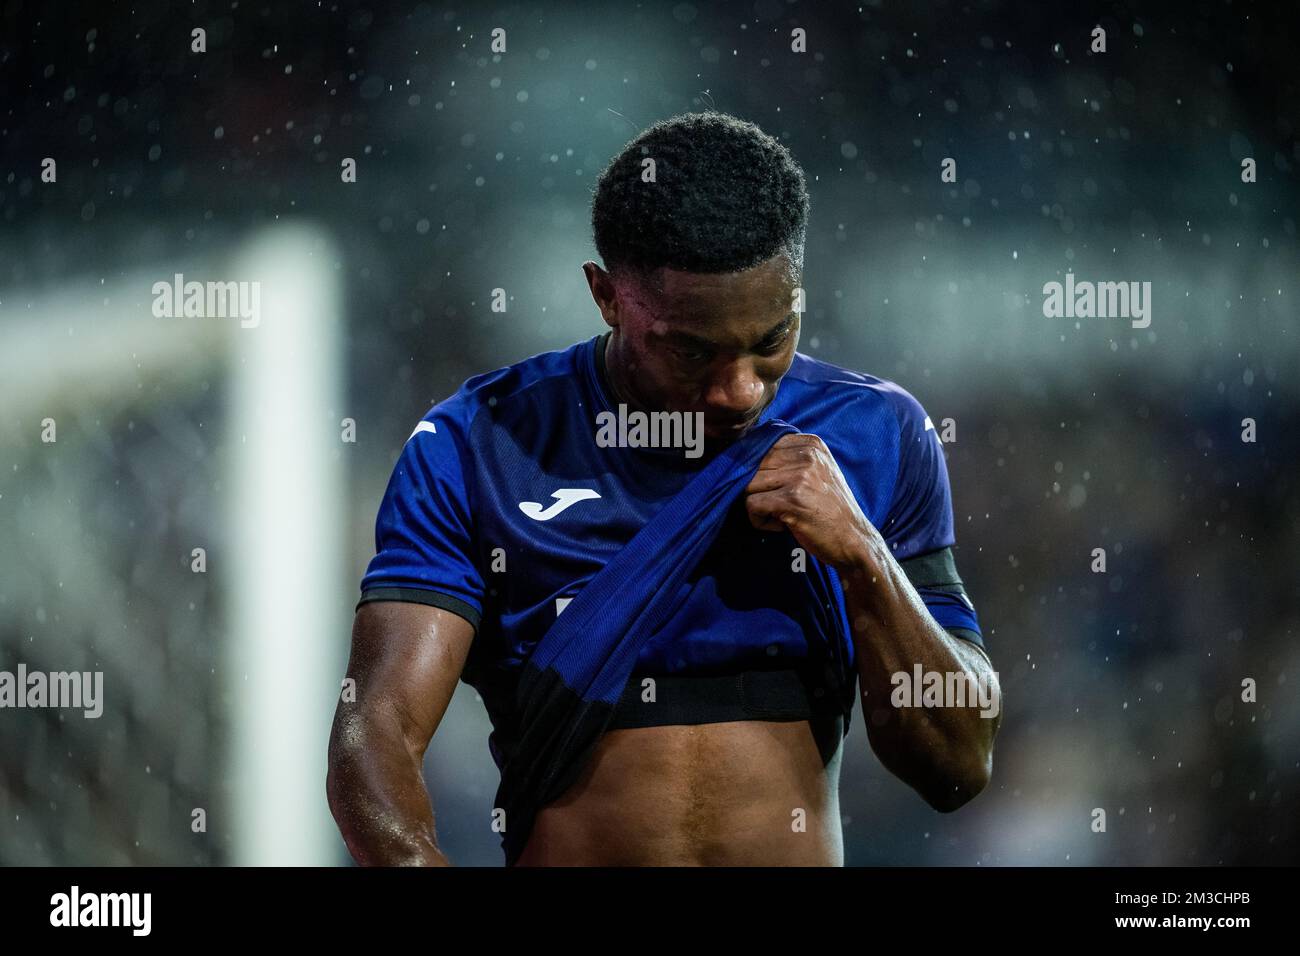 Anderlecht's Francis Amuzu leaves the pitch after being injured during a soccer match between RSCA Anderlecht and KV Kortrijk, Sunday 18 September 2022 in Anderlecht, on day 9 of the 2022-2023 'Jupiler Pro League' first division of the Belgian championship. BELGA PHOTO JASPER JACOBS Stock Photo